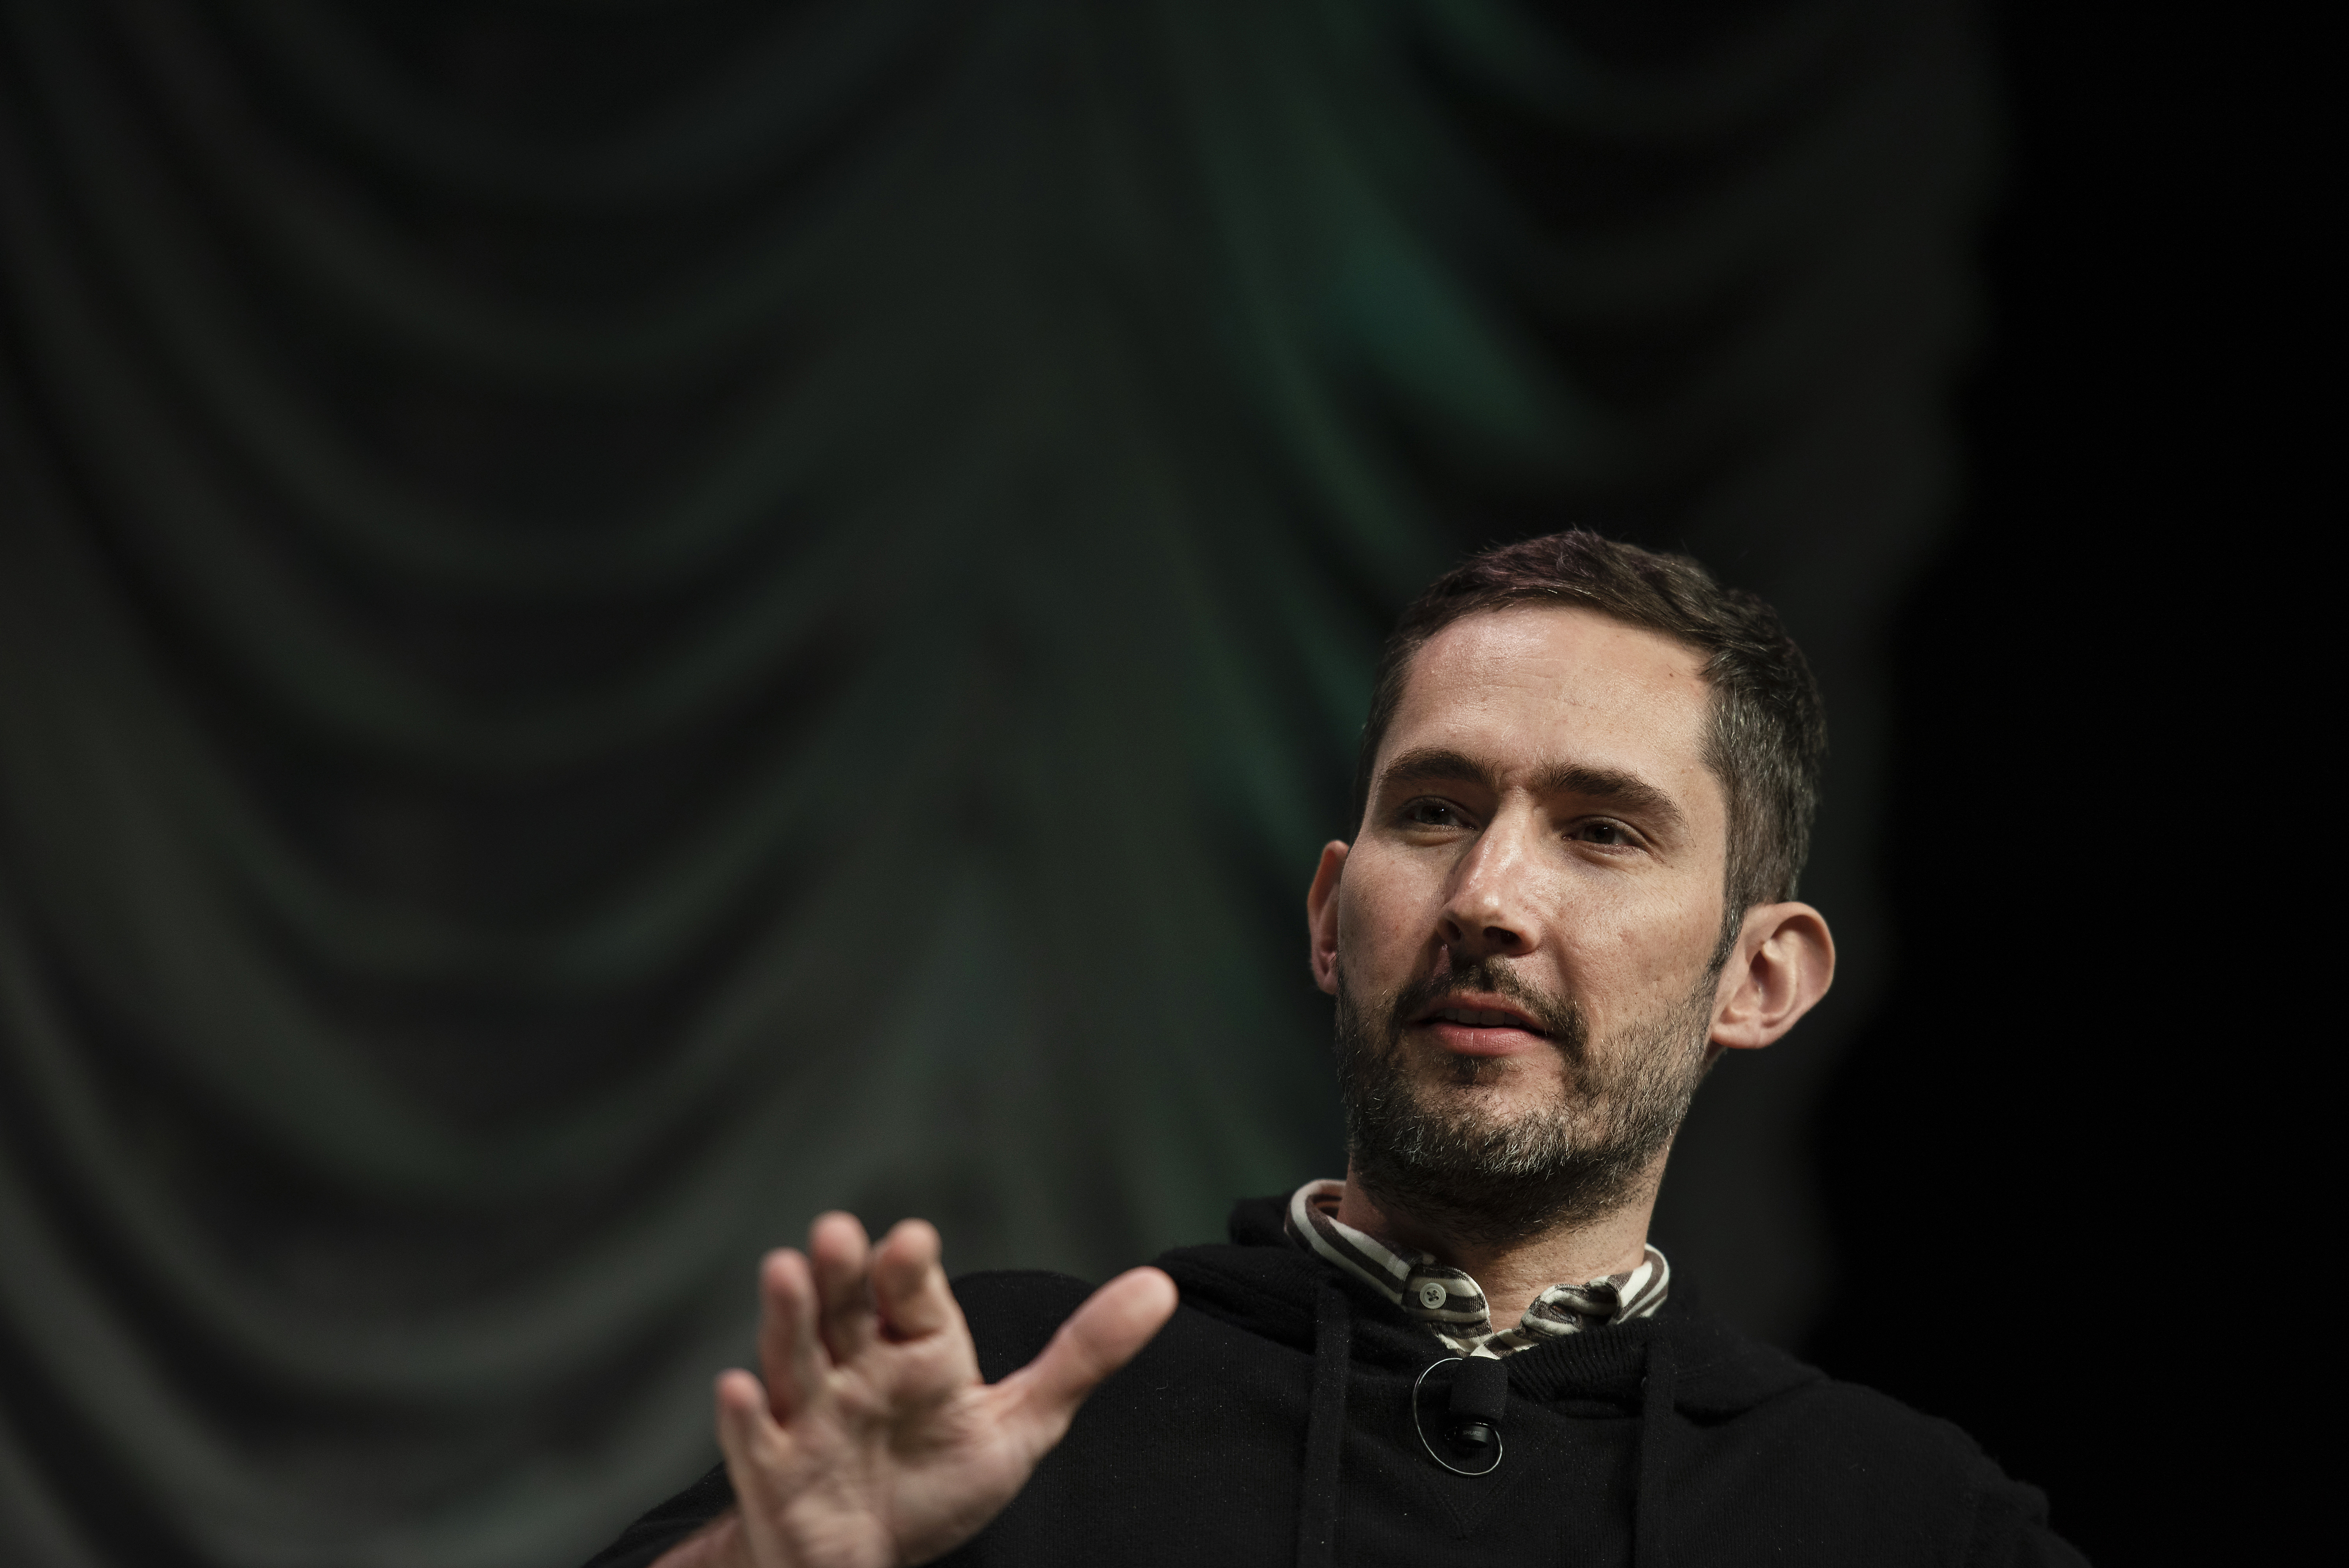 Instagram co-founder Kevin Systrom speaks at the South By Southwest conference in Austin, Texas, March 11, 2019.